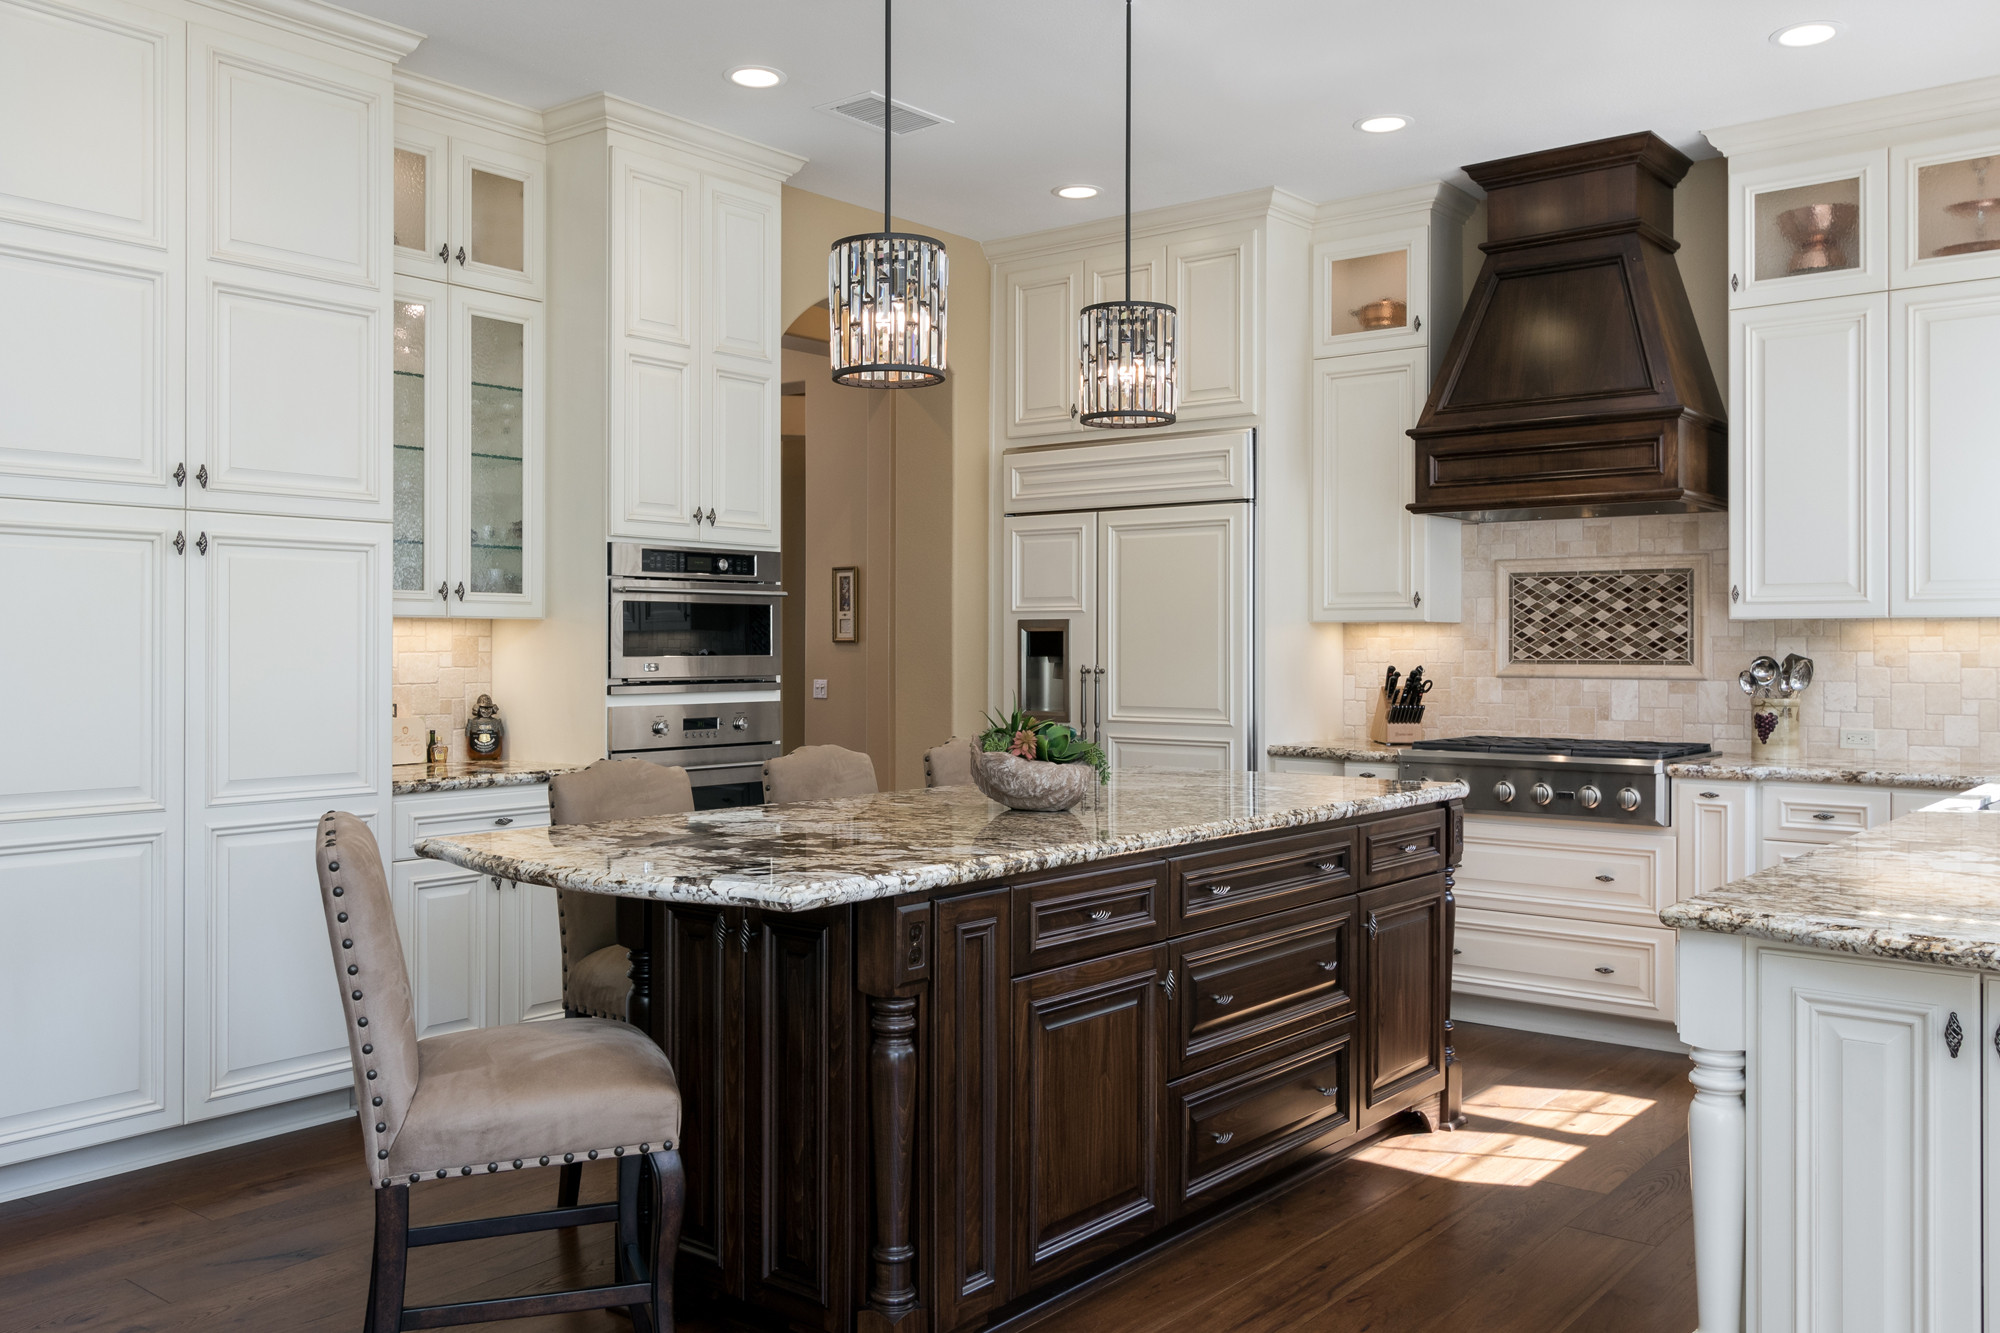 Kitchen Remodeling Contractor San Diego
 Kitchen Remodeling San Diego